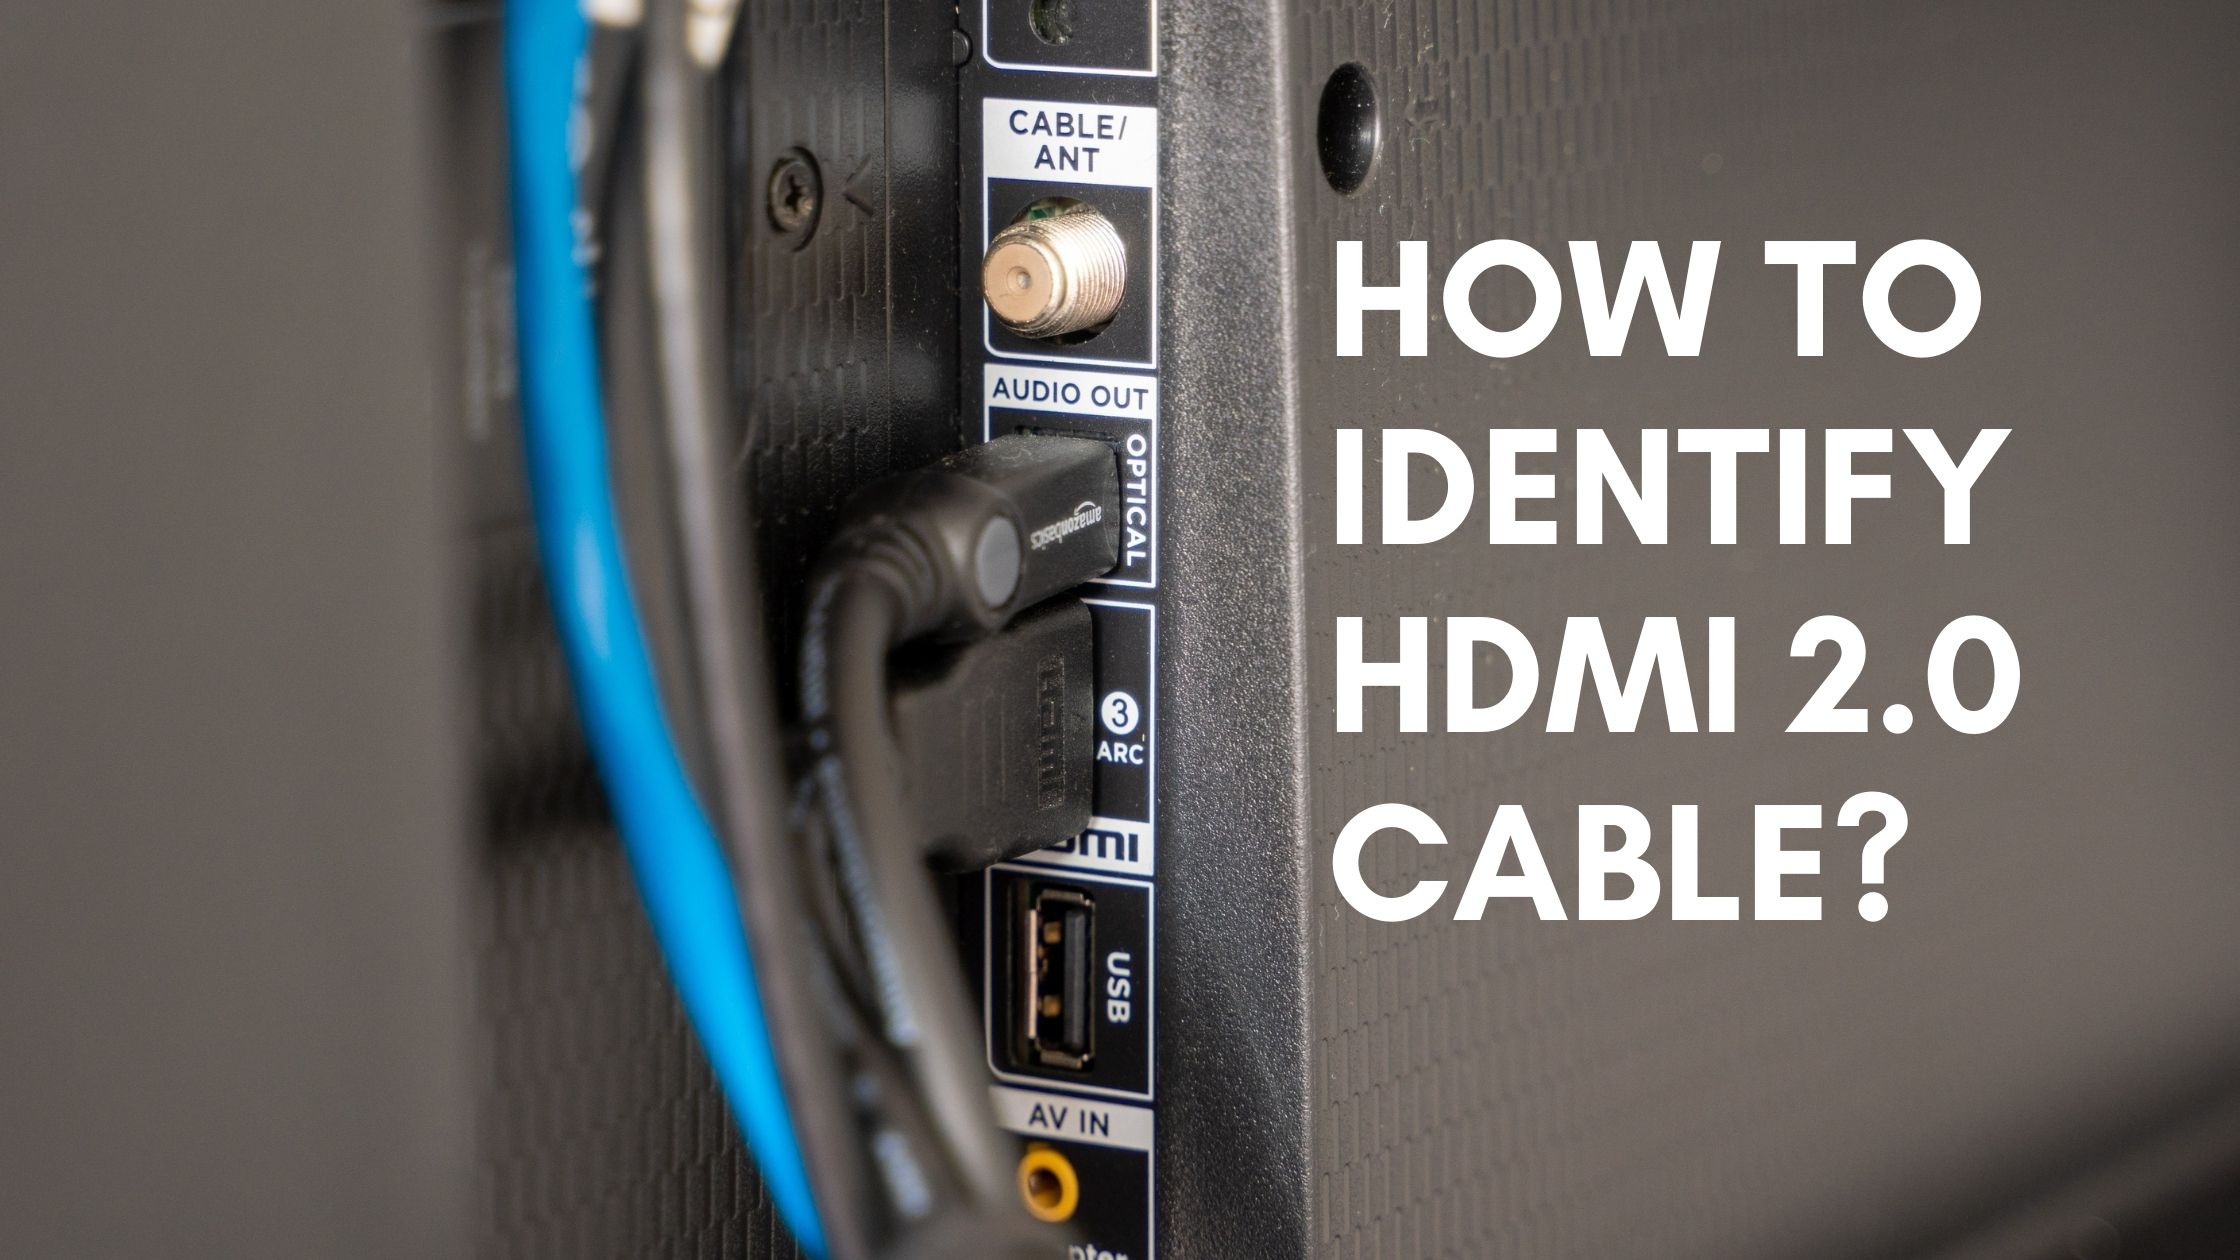 How To Know If HDMI Cable Is 2.0